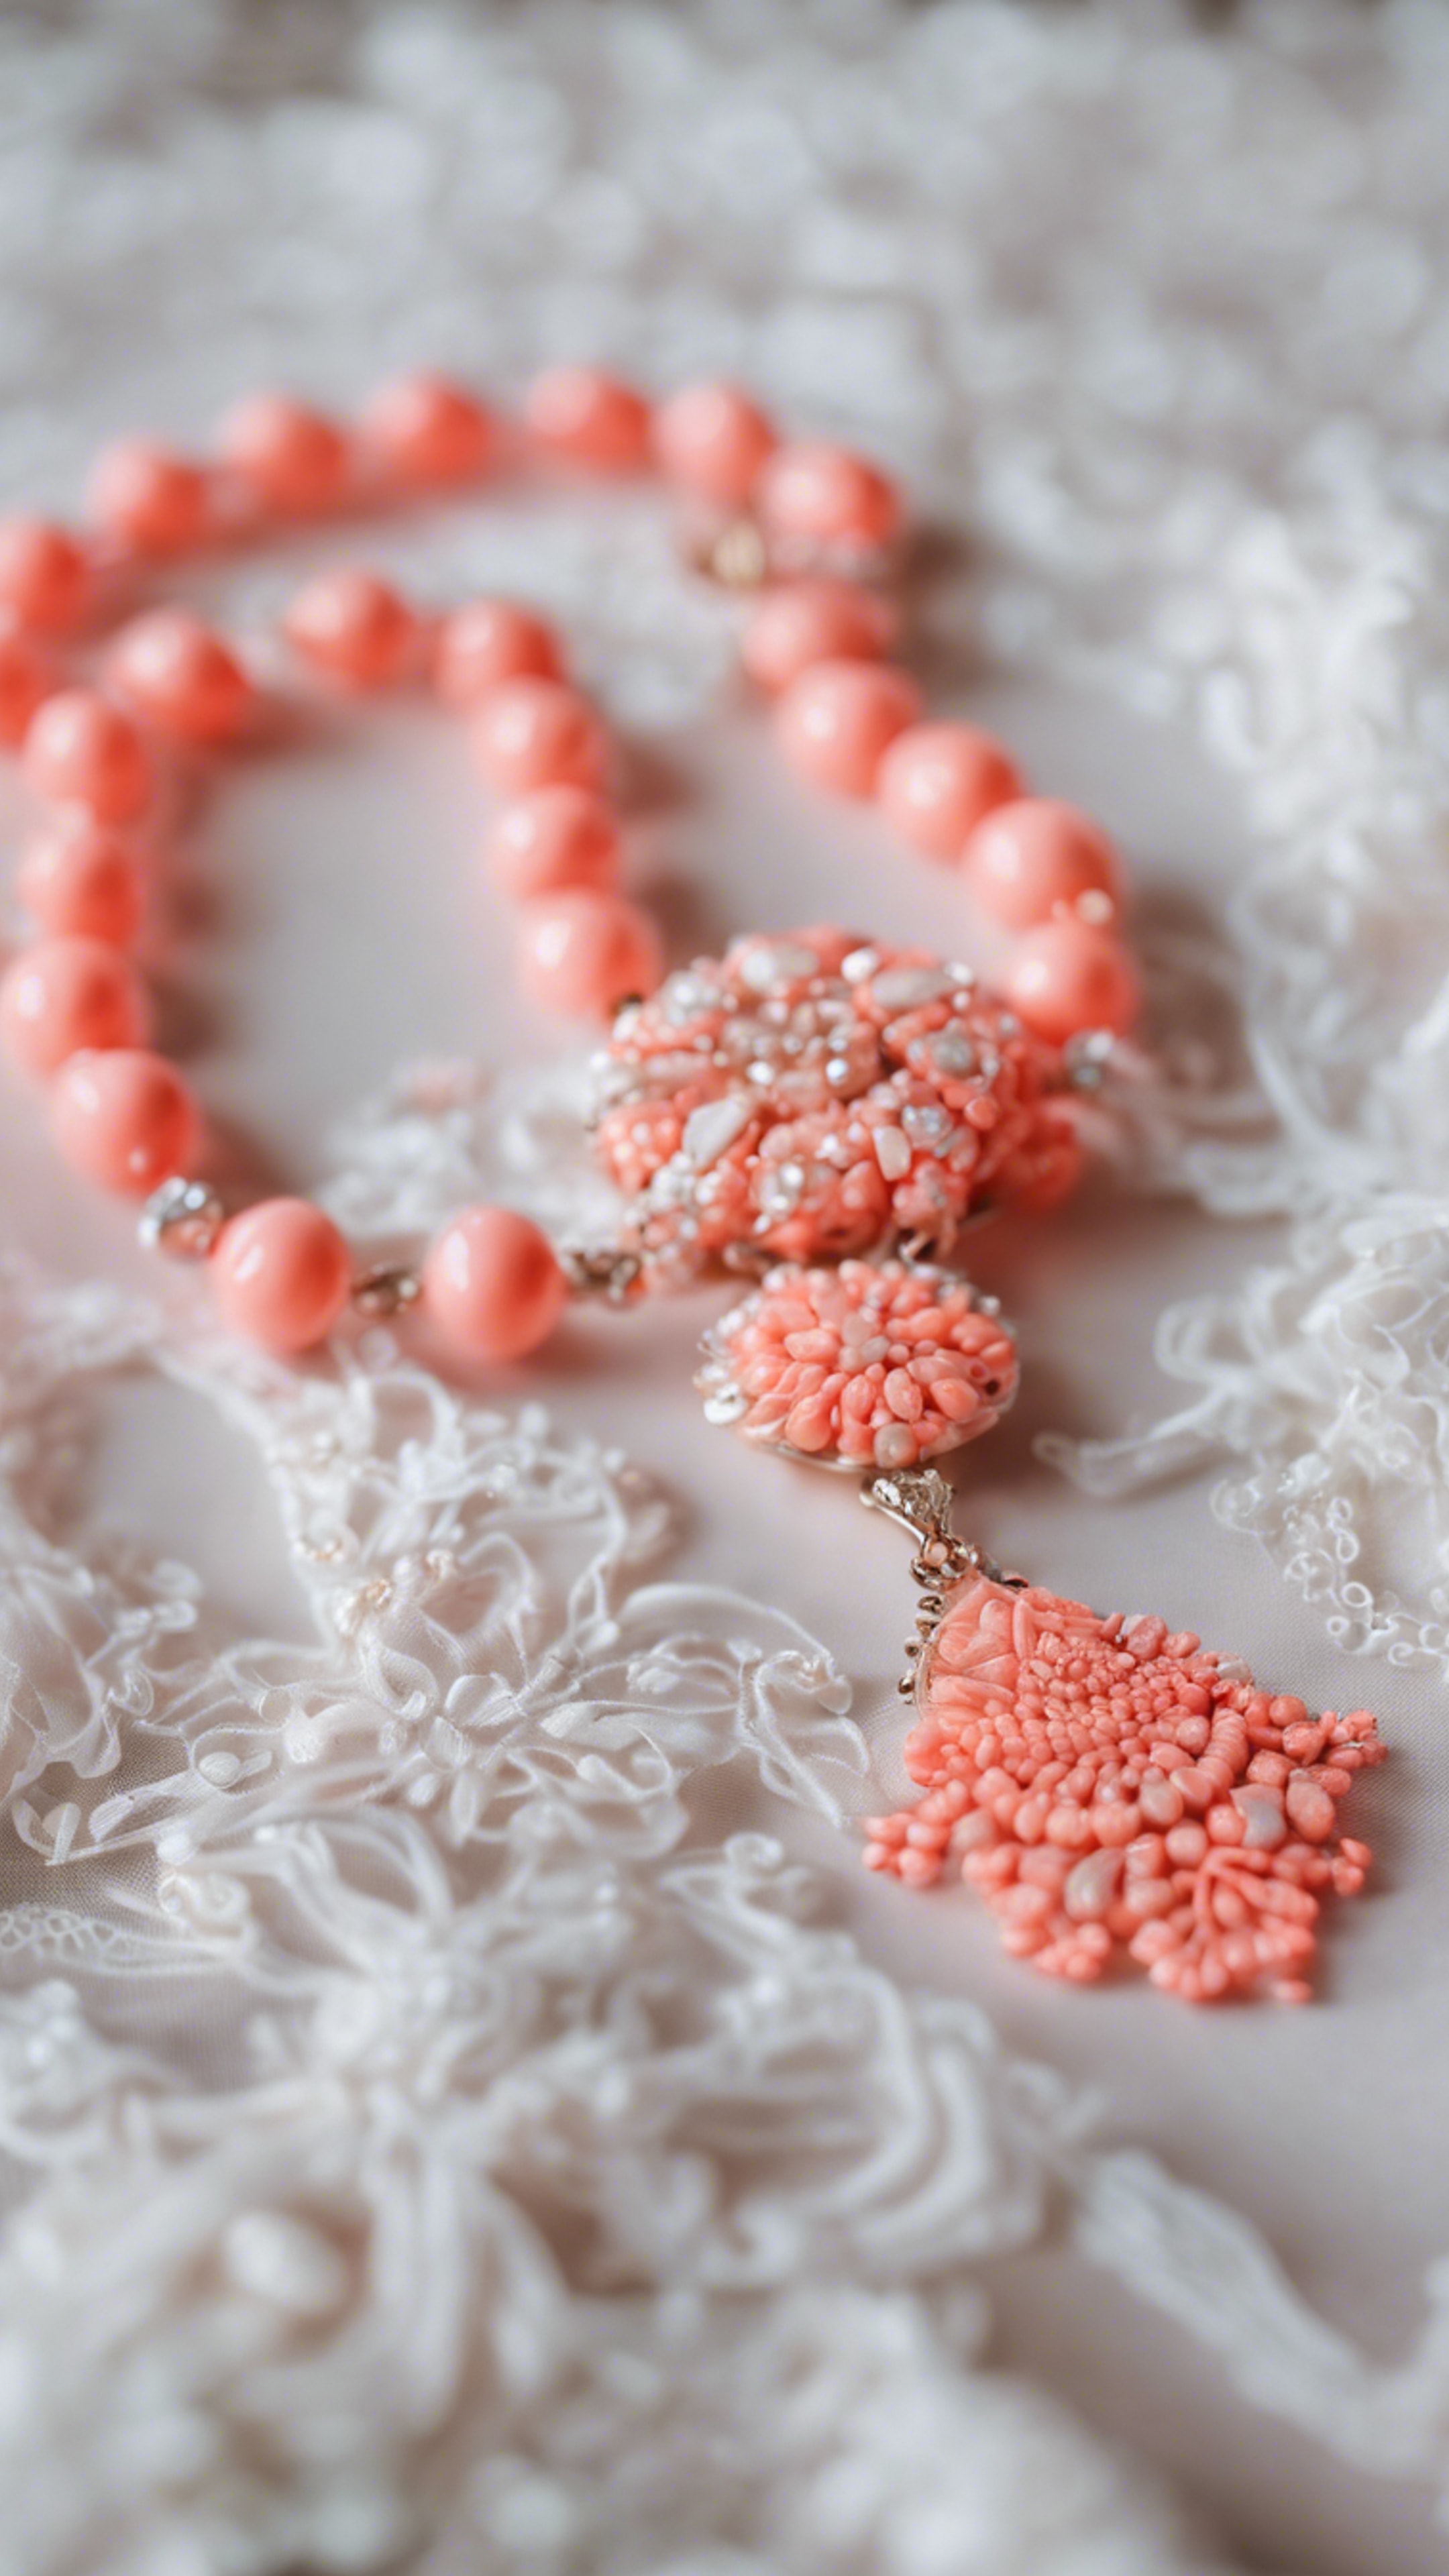 A preppy neon coral necklace against a white lace dress. วอลล์เปเปอร์[7558fb99fbaf41faa5f9]